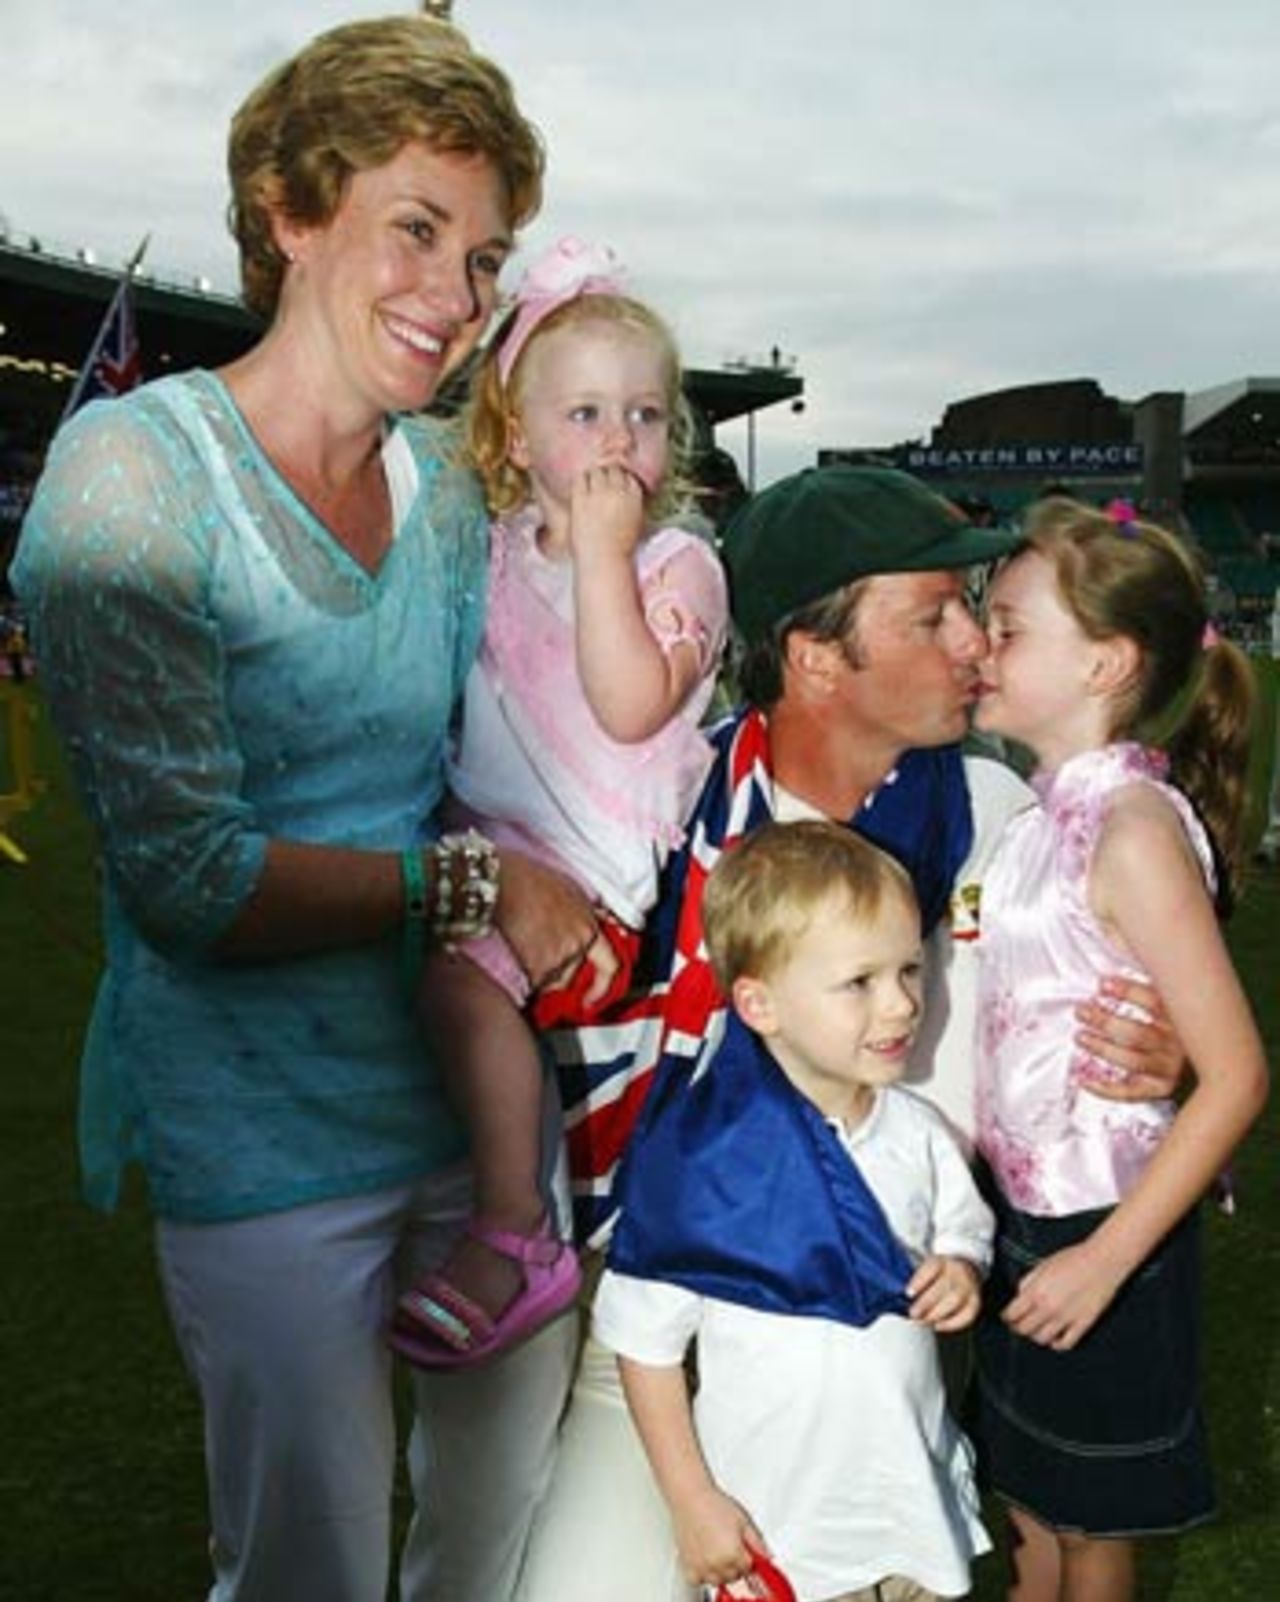 Steve Waugh took a moment out to spend time with his wife Lynette and three children, Australia v India, 4th Test, Sydney, 5th day, January 6, 2004